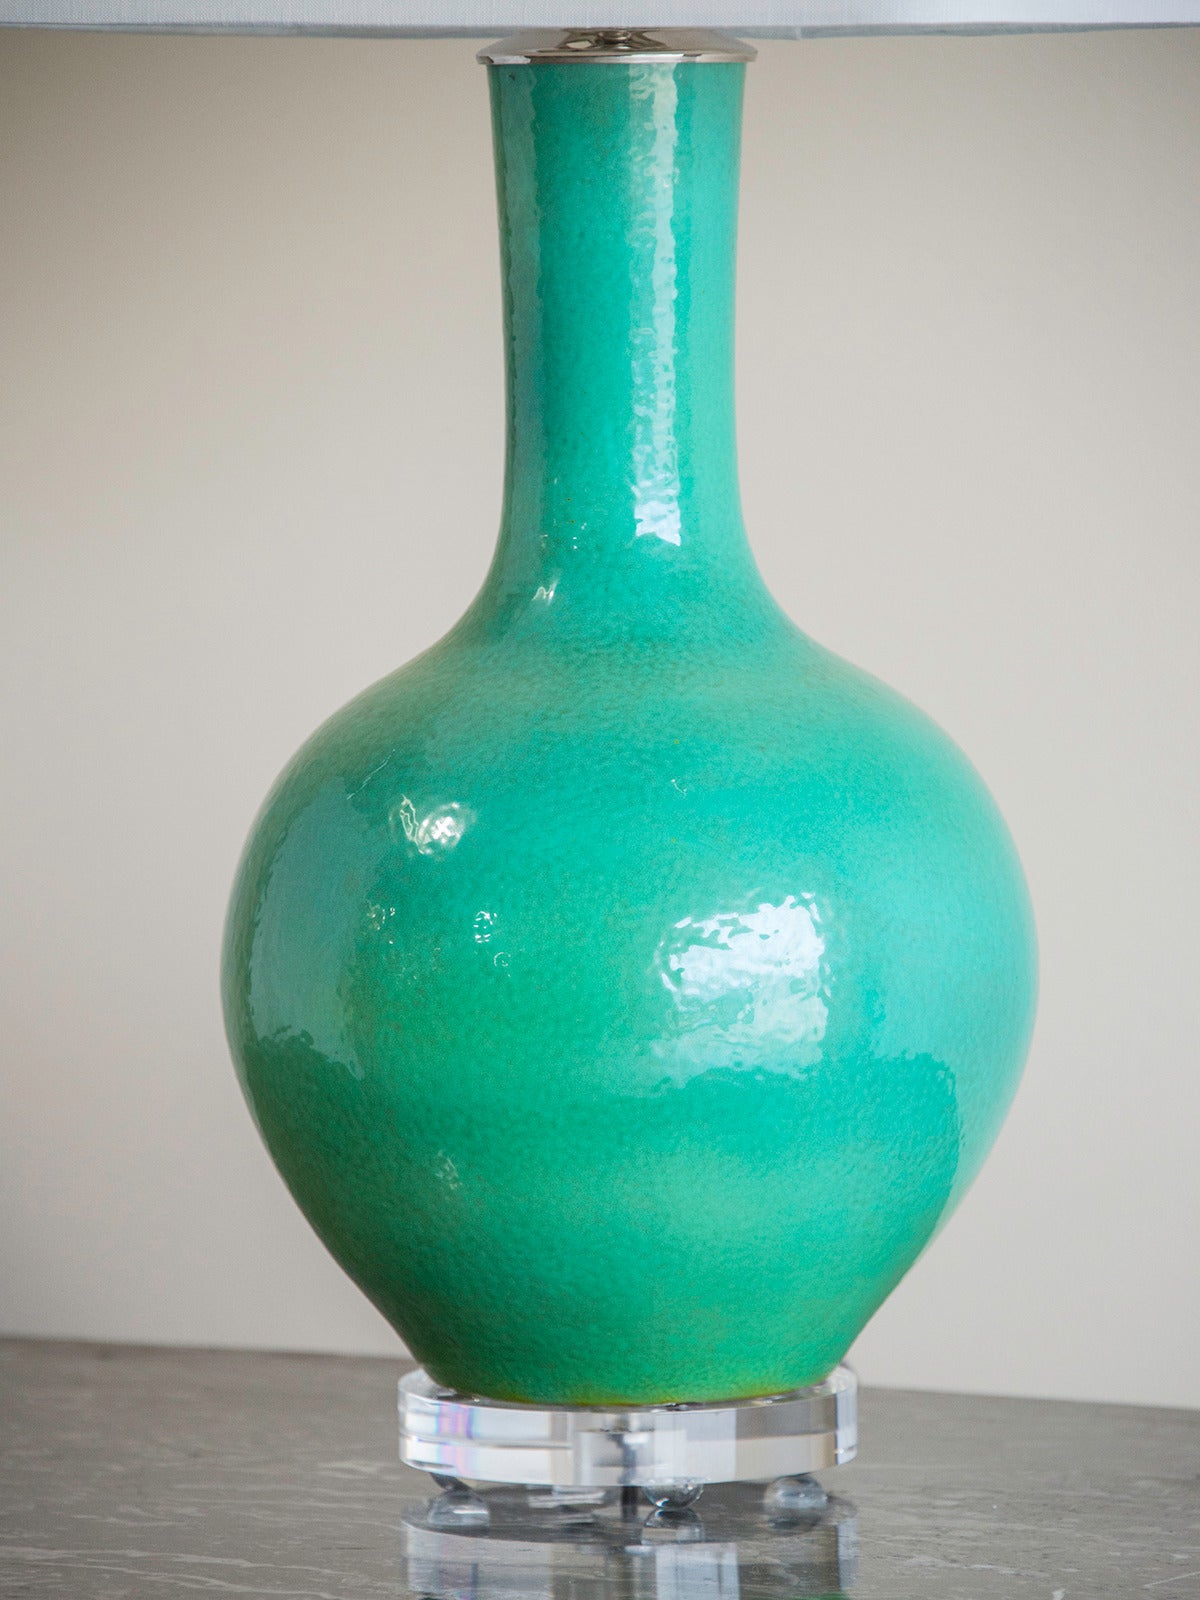 Turquoise Chinese vase mounted on a Lucite base as lamp.